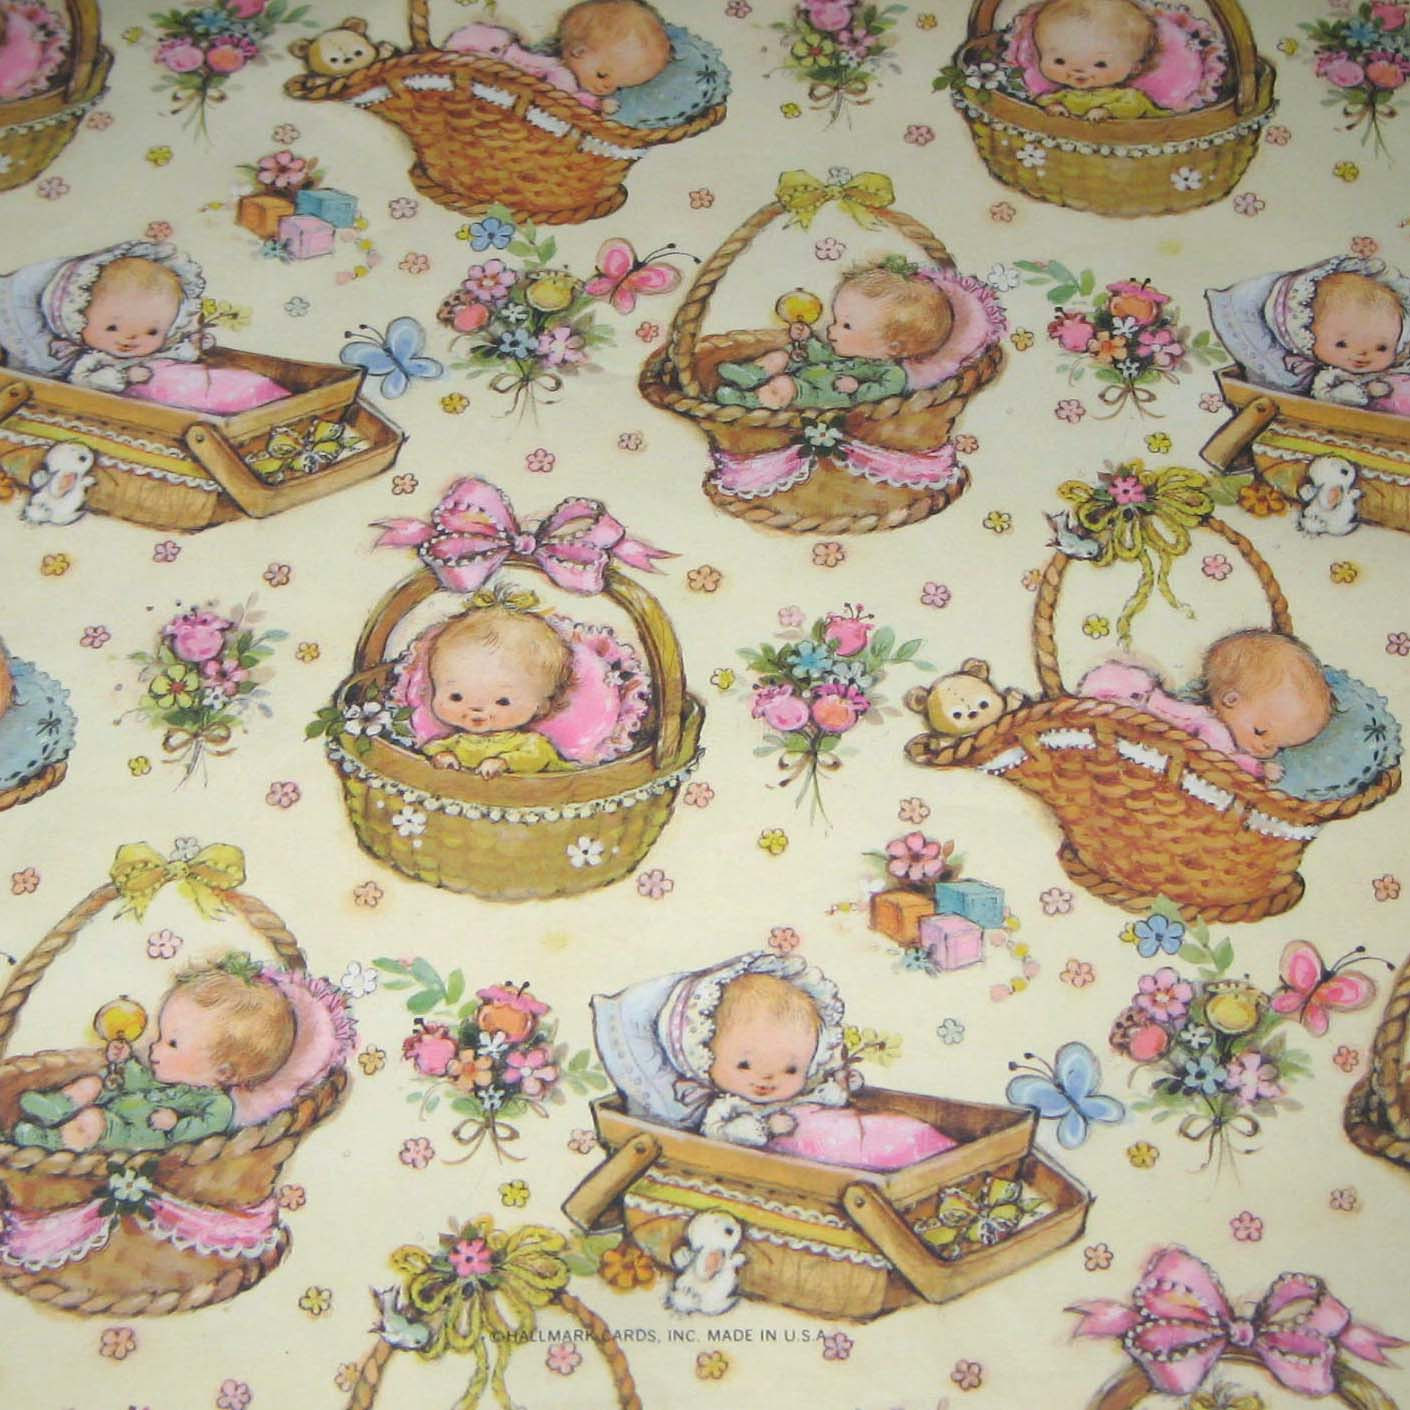 Classic Baby Gifts
 Vintage Wrapping Paper or Gift Wrap with Babies in Baskets by